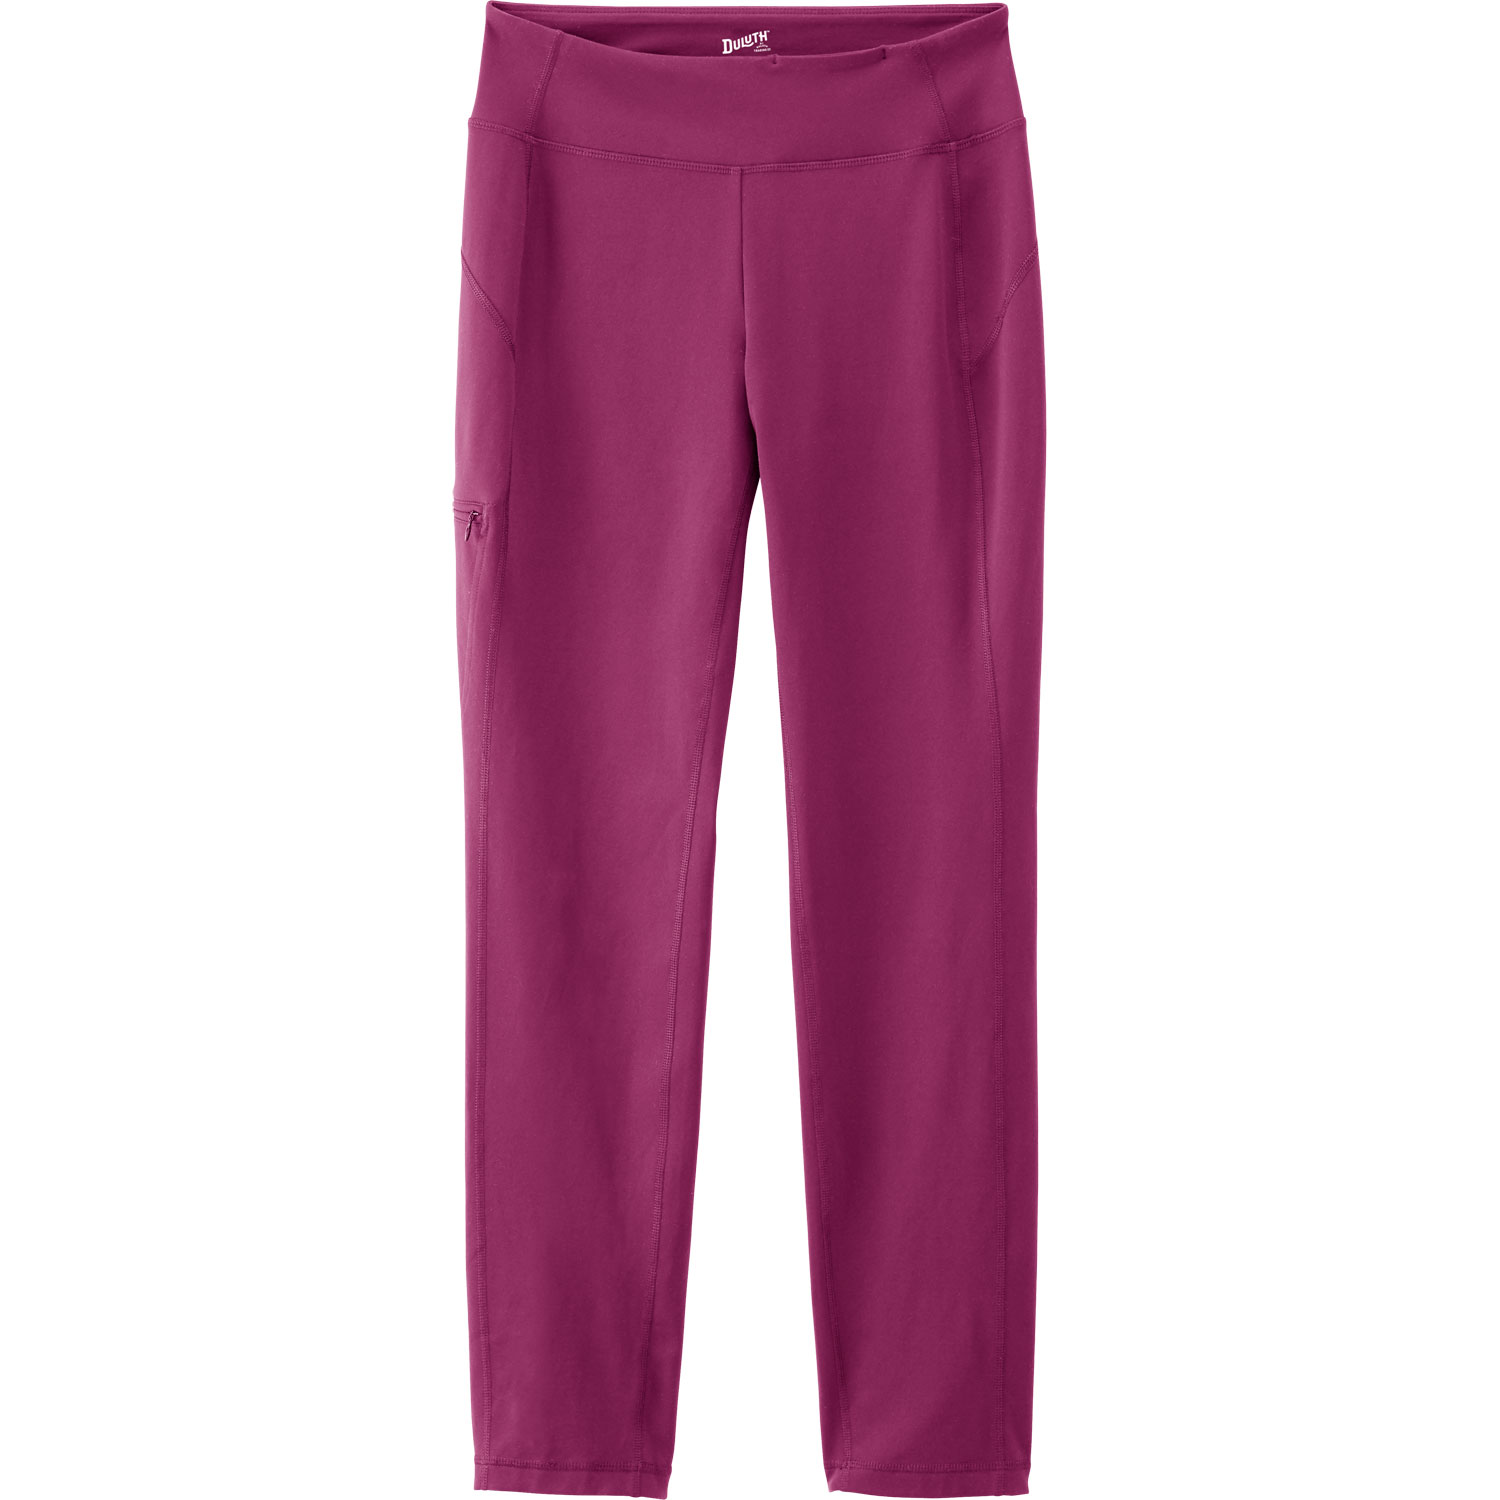 Women's Classic Curling Pants for sale in Duluth, MN